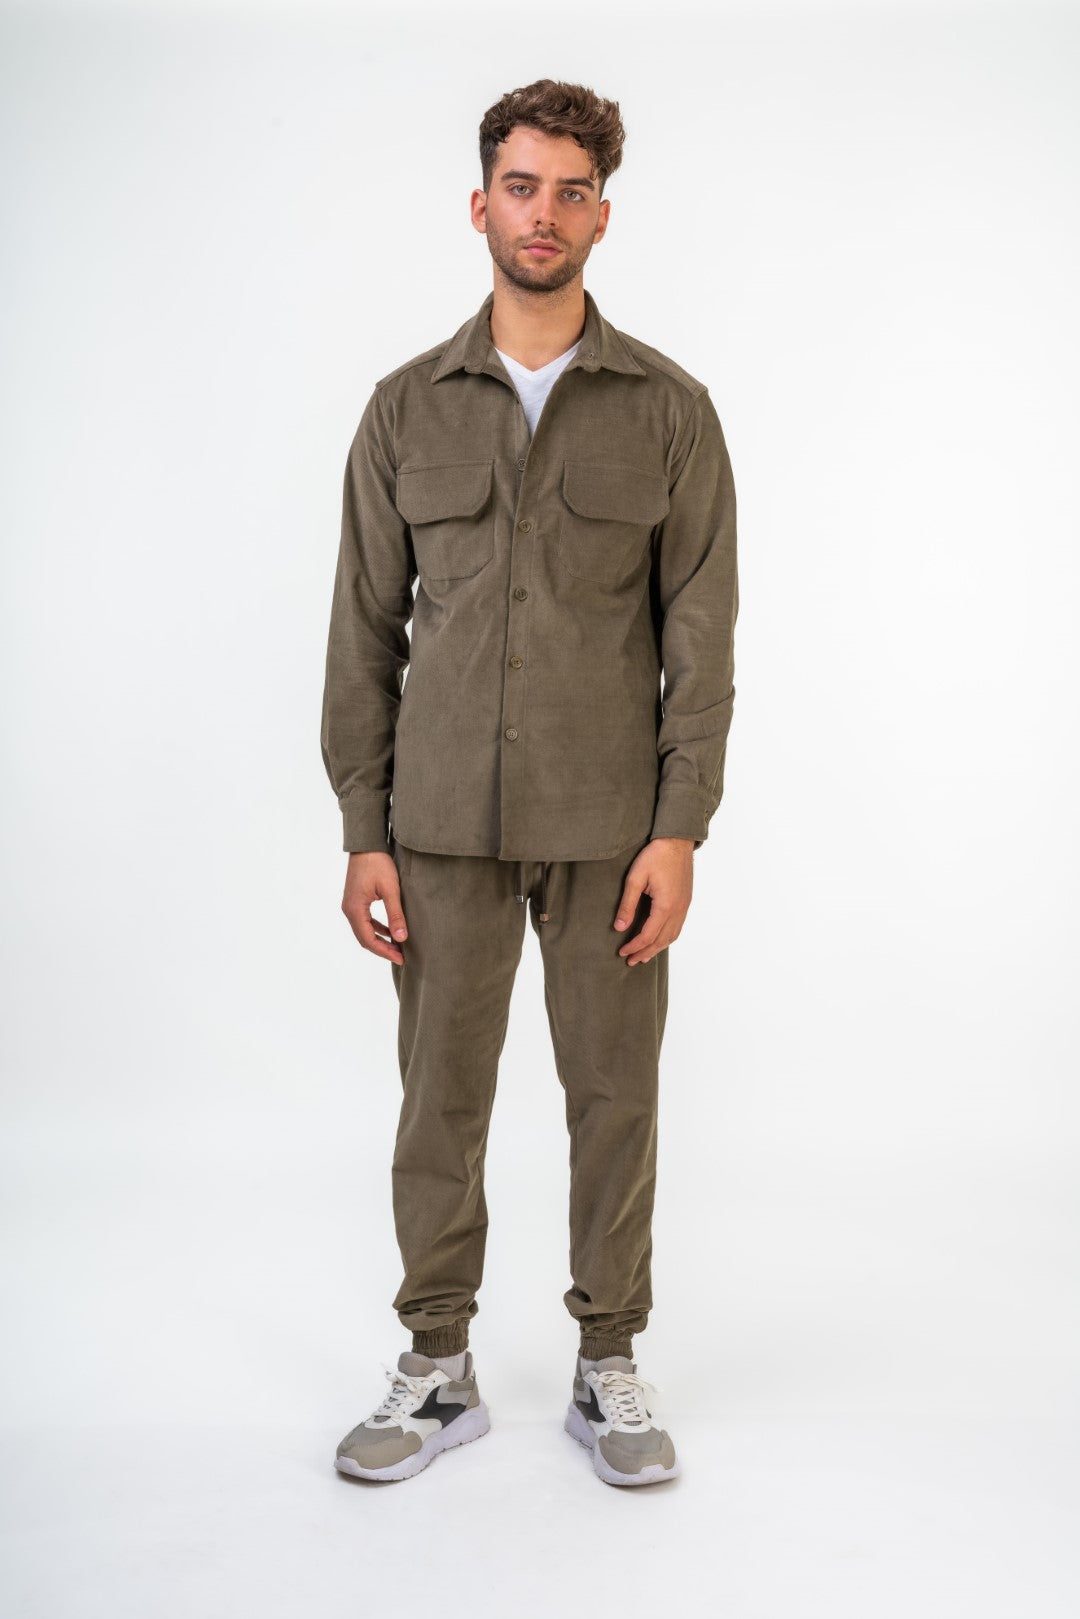 Comfy Corduroy Overshirt with Front Pockets and Slim Fit String Trousers